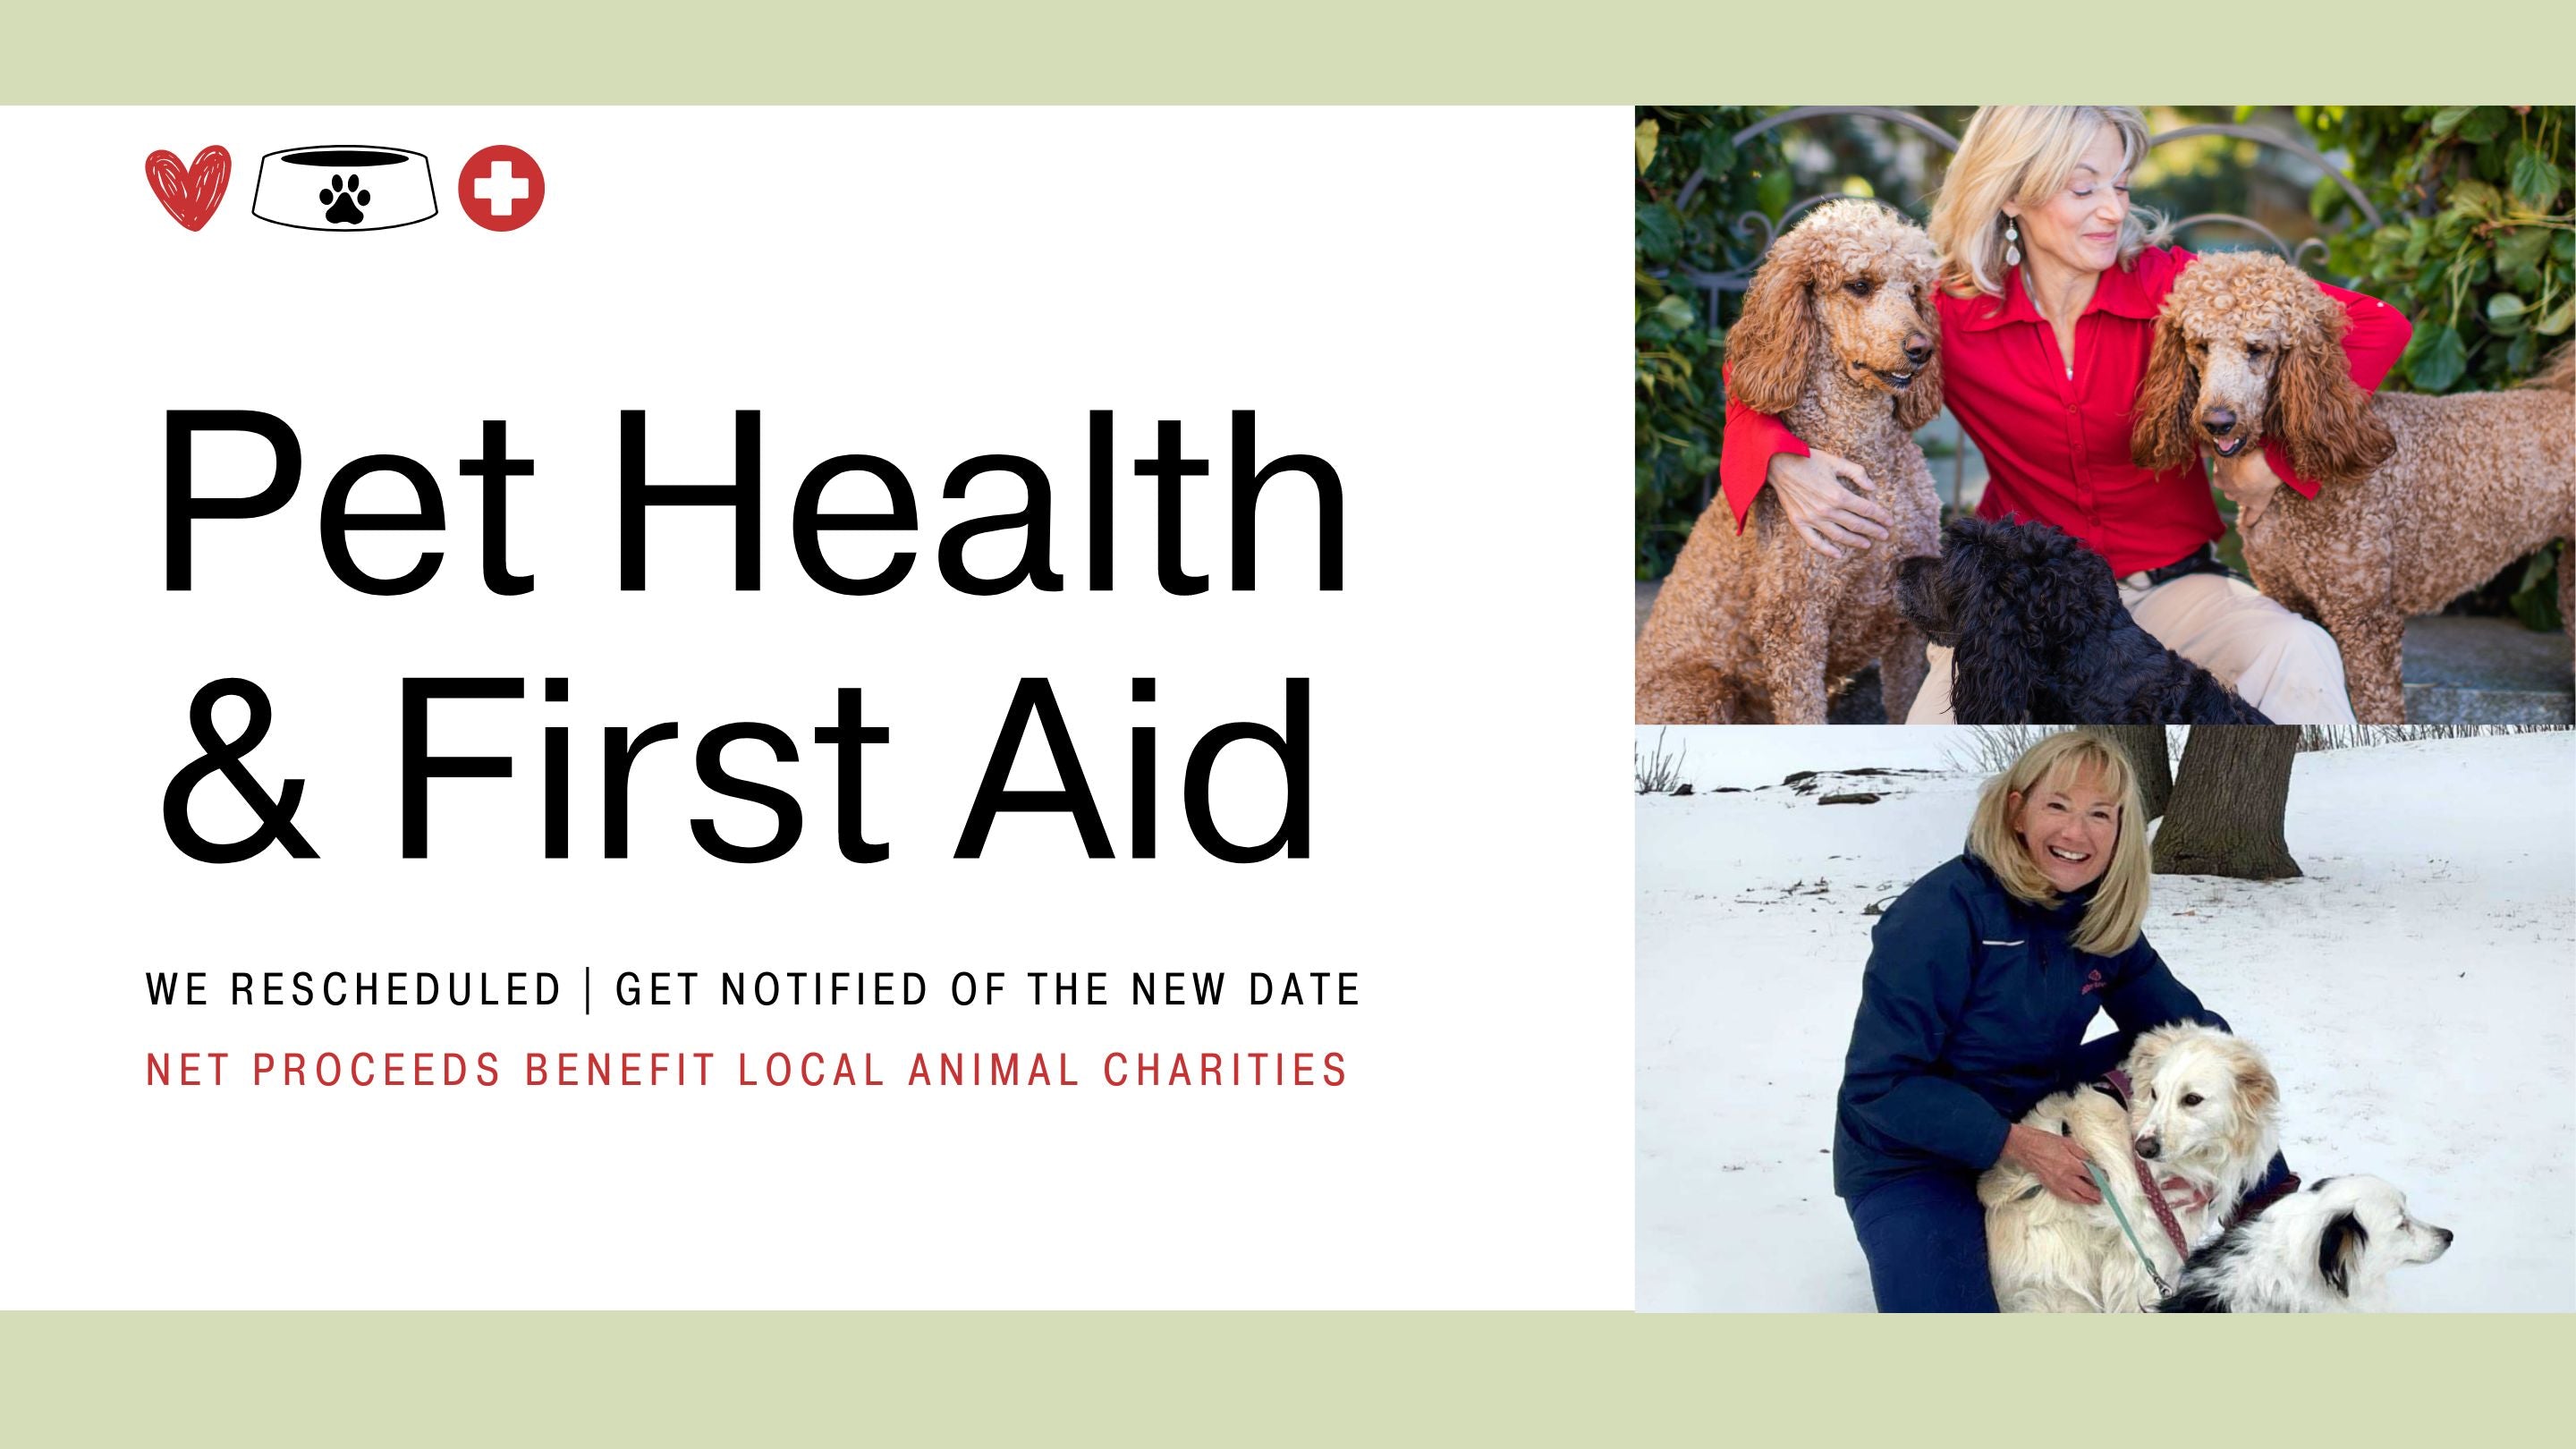 Pet Health Nutrition First Aid And CPR Workshop to Benefit Charity